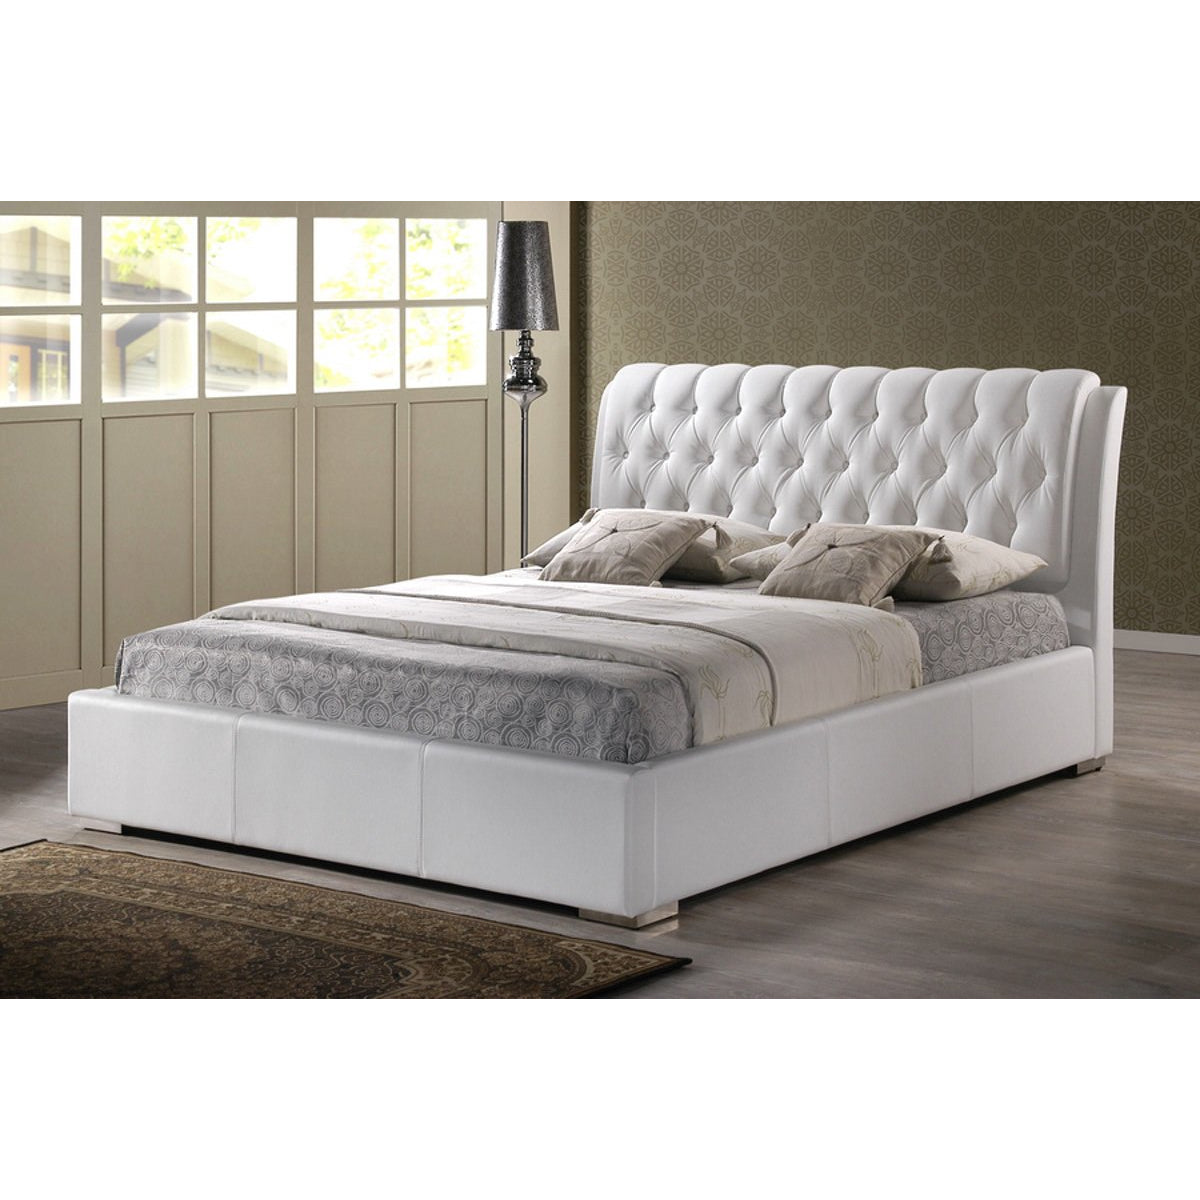 Baxton Studio Bianca White Modern Bed with Tufted Headboard (Queen Size) Baxton Studio-beds-Minimal And Modern - 1